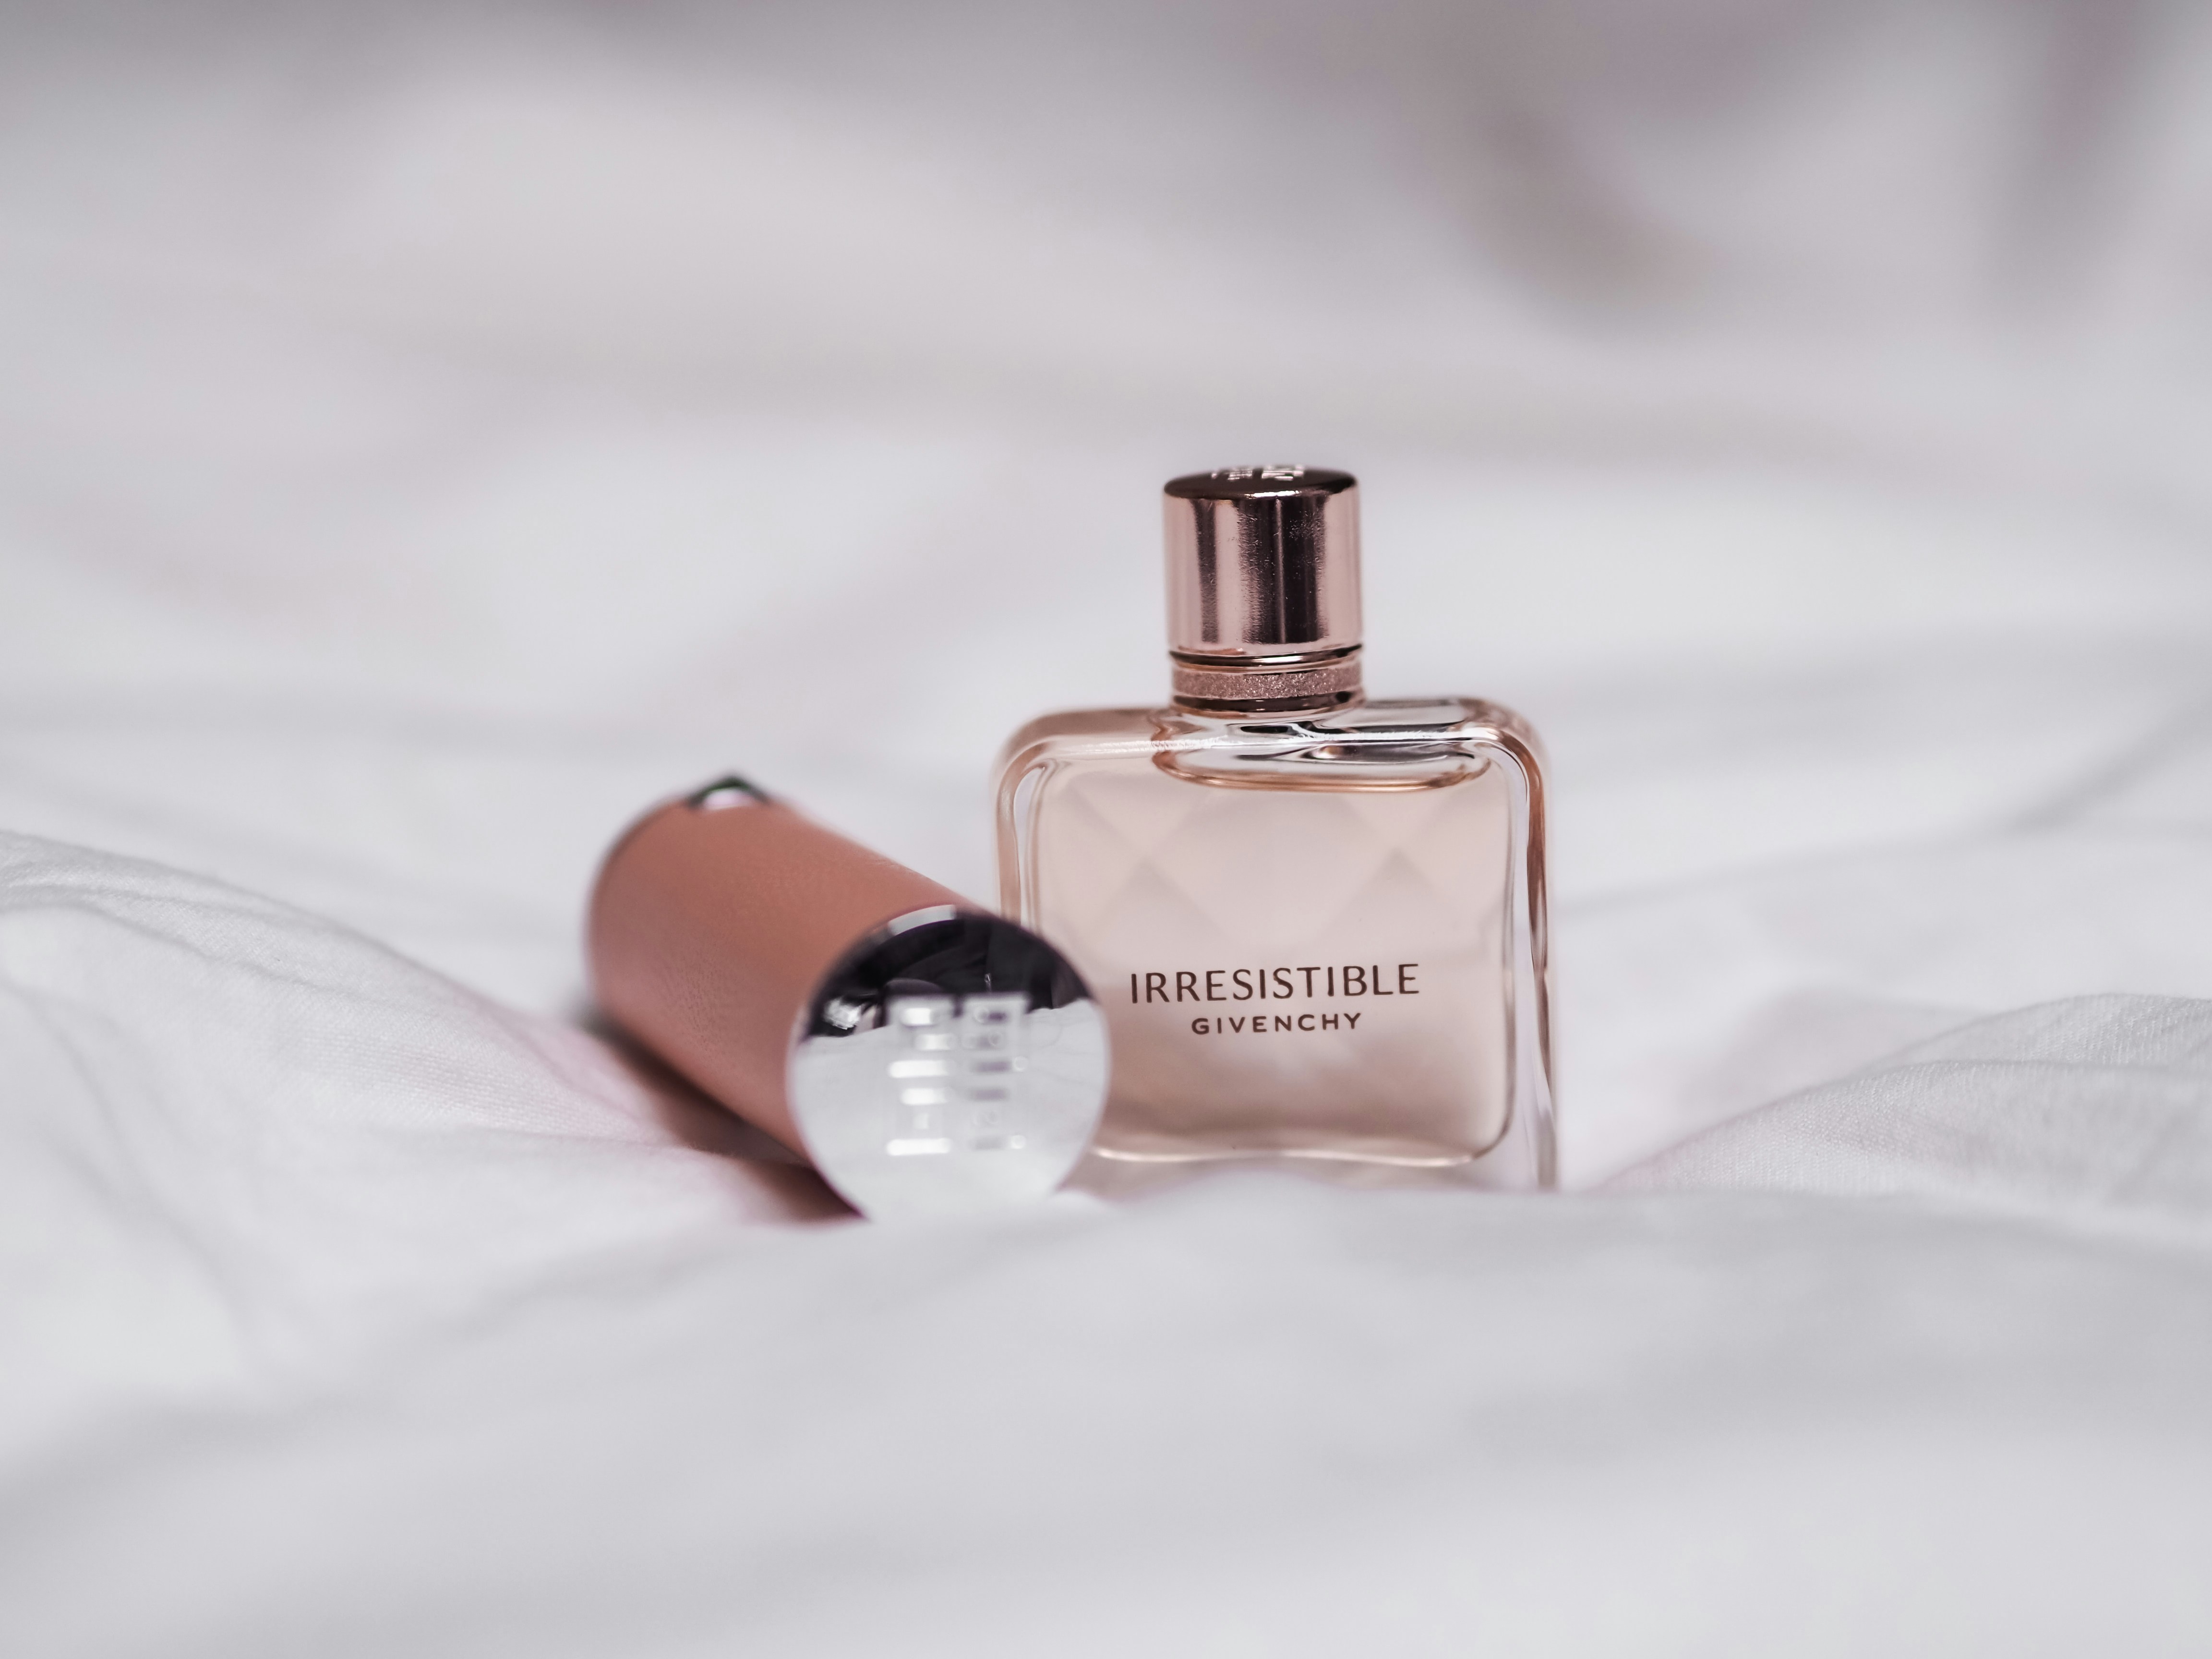 #IrresistibleIsYou by @Givenchy @GivenchyBeauty. 💗 Irresistible Perfume, Lipstick and Pouch with logo. Photo by Laura Chouette ©FreeUse2020 (Thanks to MarionnaudAustria)